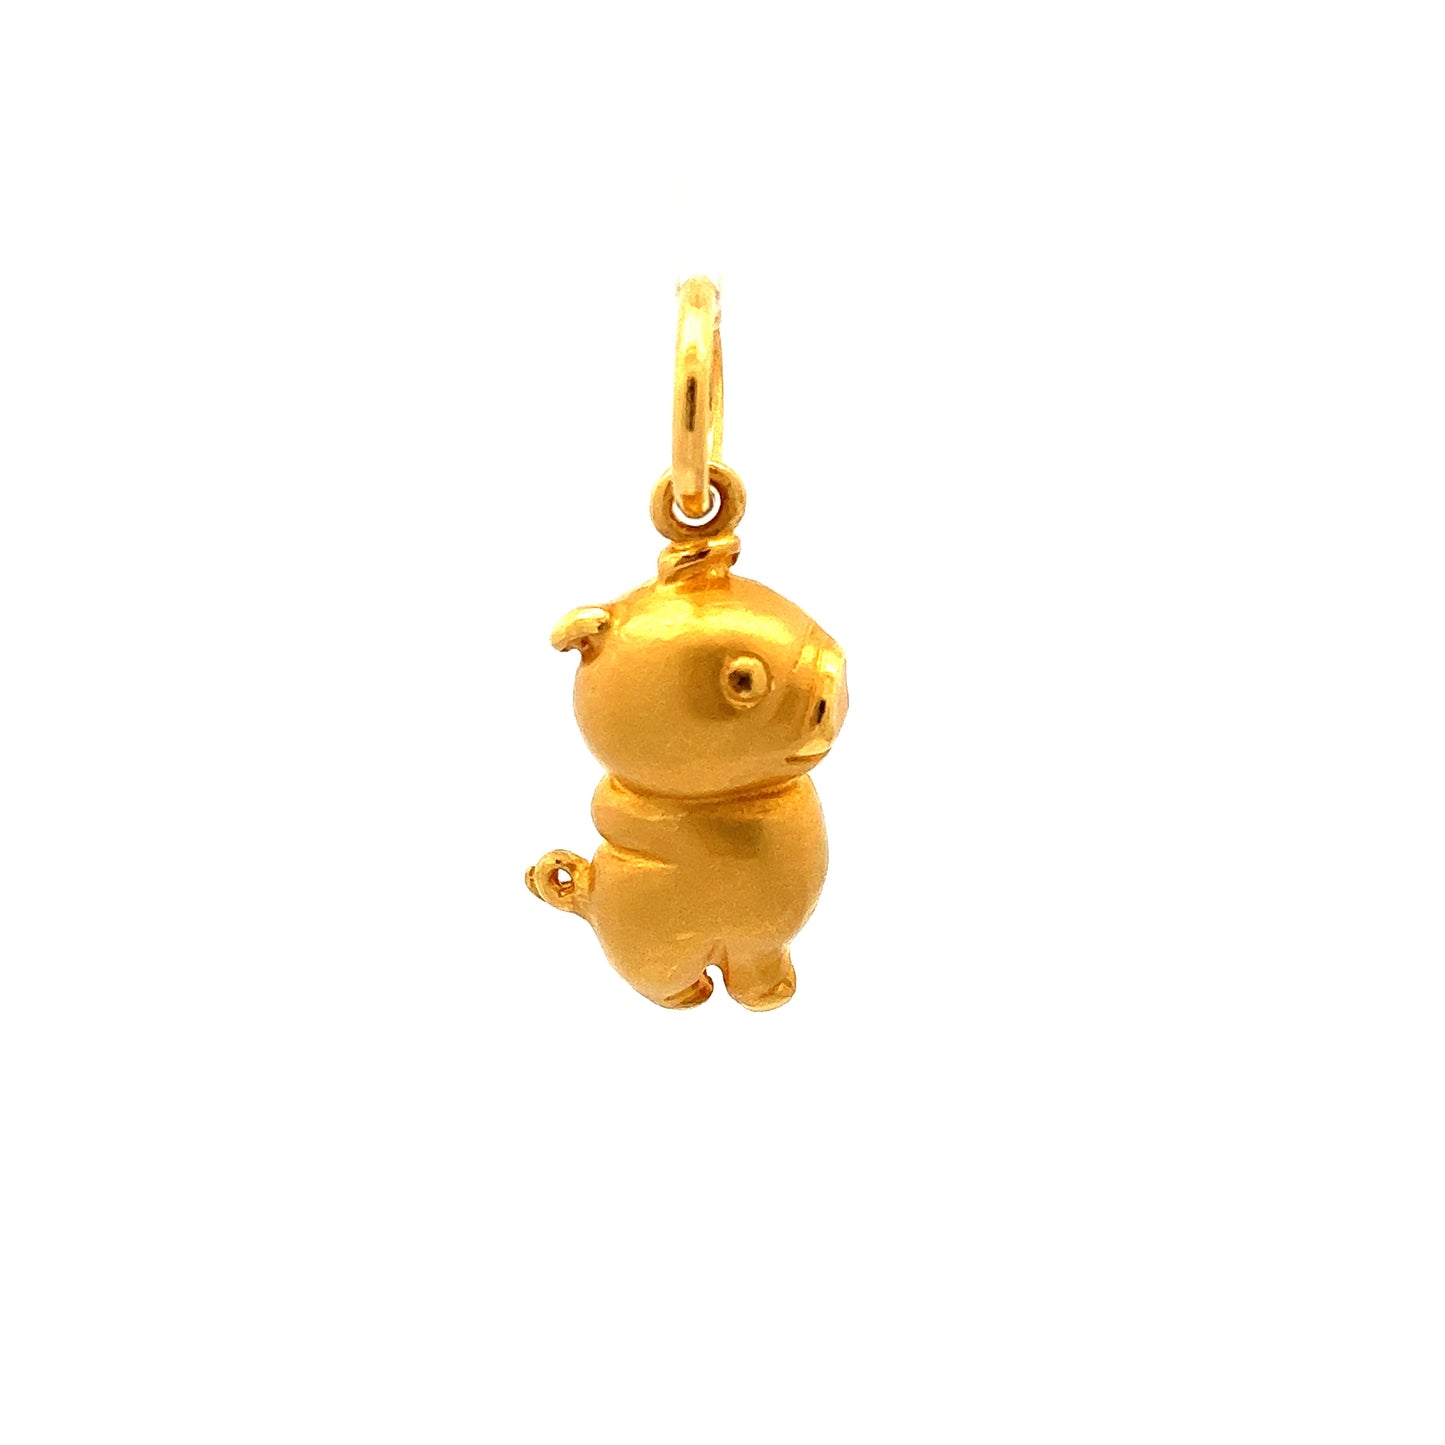 GOLD PENDANT ( 22K ) ( 2.31g ) - P001393 Chain sold separately